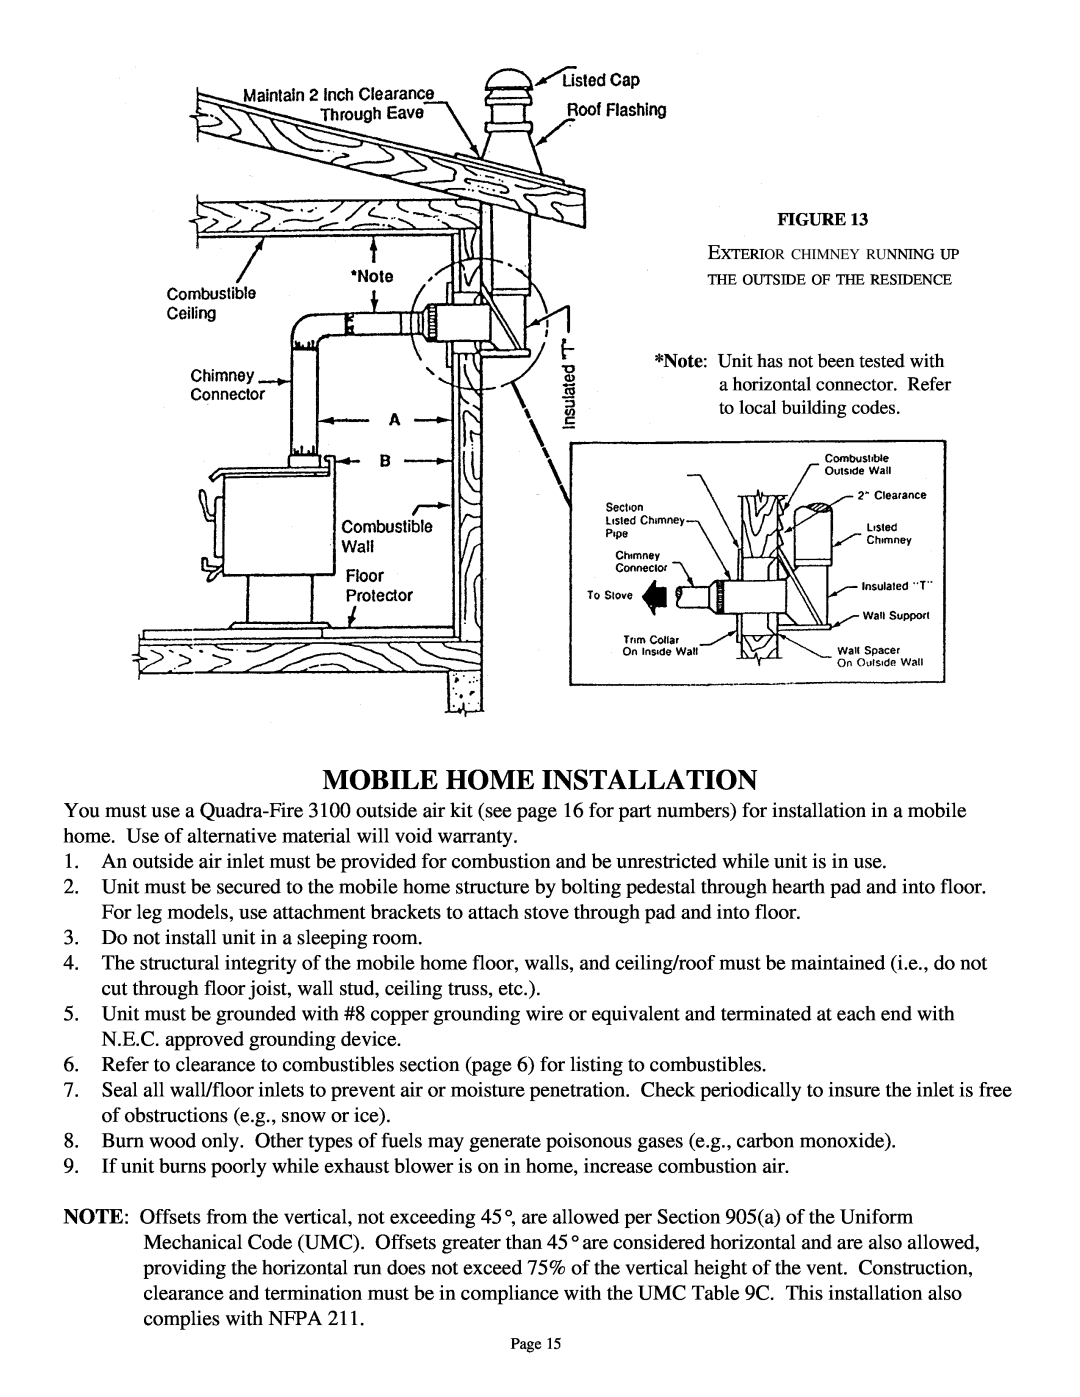 Quadra-Fire 3100 owner manual Mobile Home Installation 